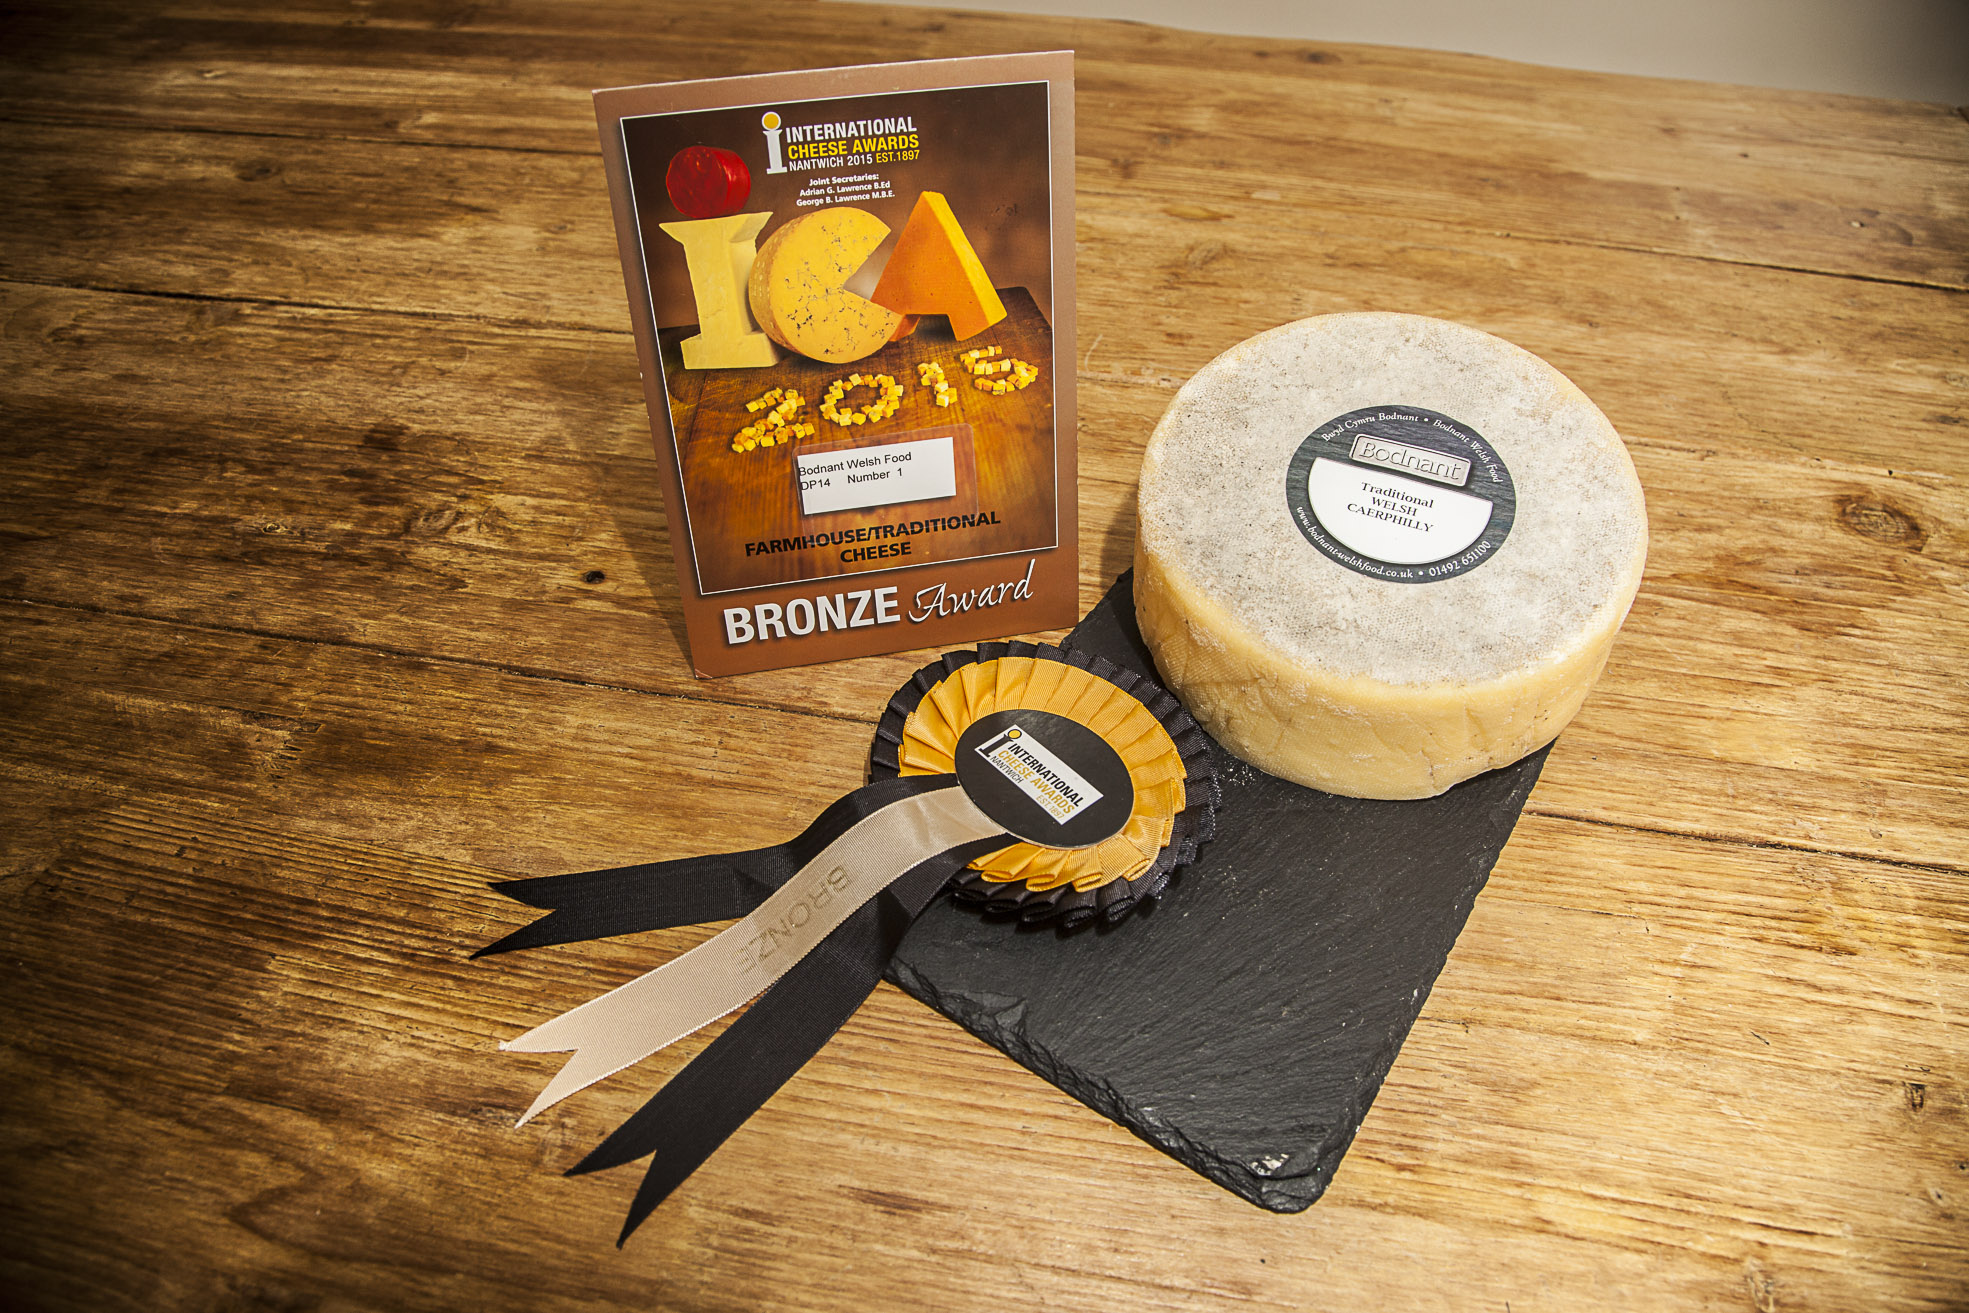 Bodnant Welsh Food Centre rolls out new Caerphilly cheese made to traditional recipe